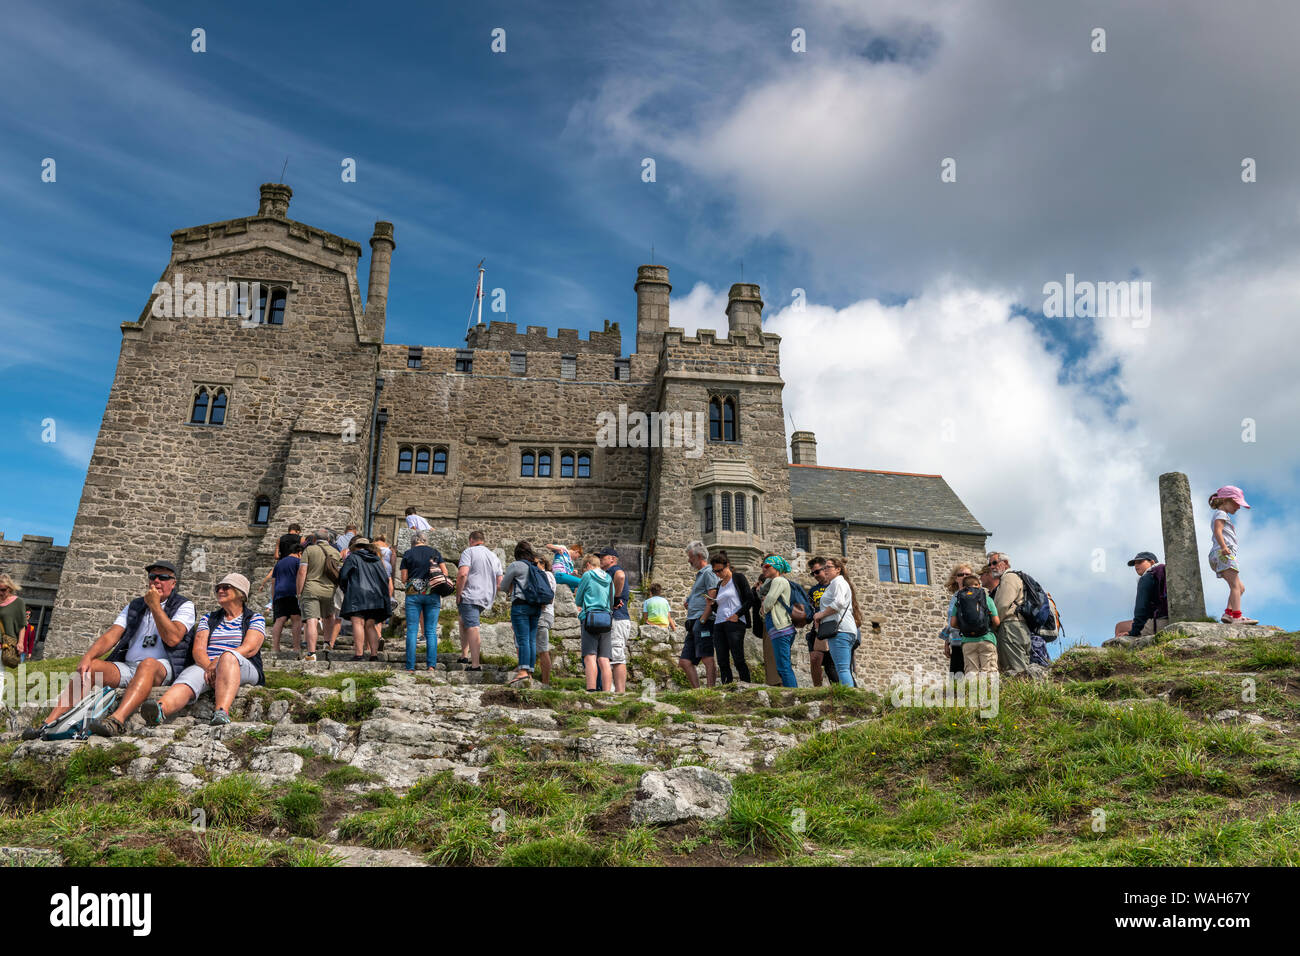 St. Michael's Mount, Marazion in West Cornwall, England. Tuesday 20th August 2019. UK Weather: On a warm summer's day with sunny intervals and occasional heavy cloud cover, tourists queue to enter the Benedictine Monastery on top of St Michaels Mount in Marazion, West Cornwall. Credit: Terry Mathews/Alamy Live News Stock Photo